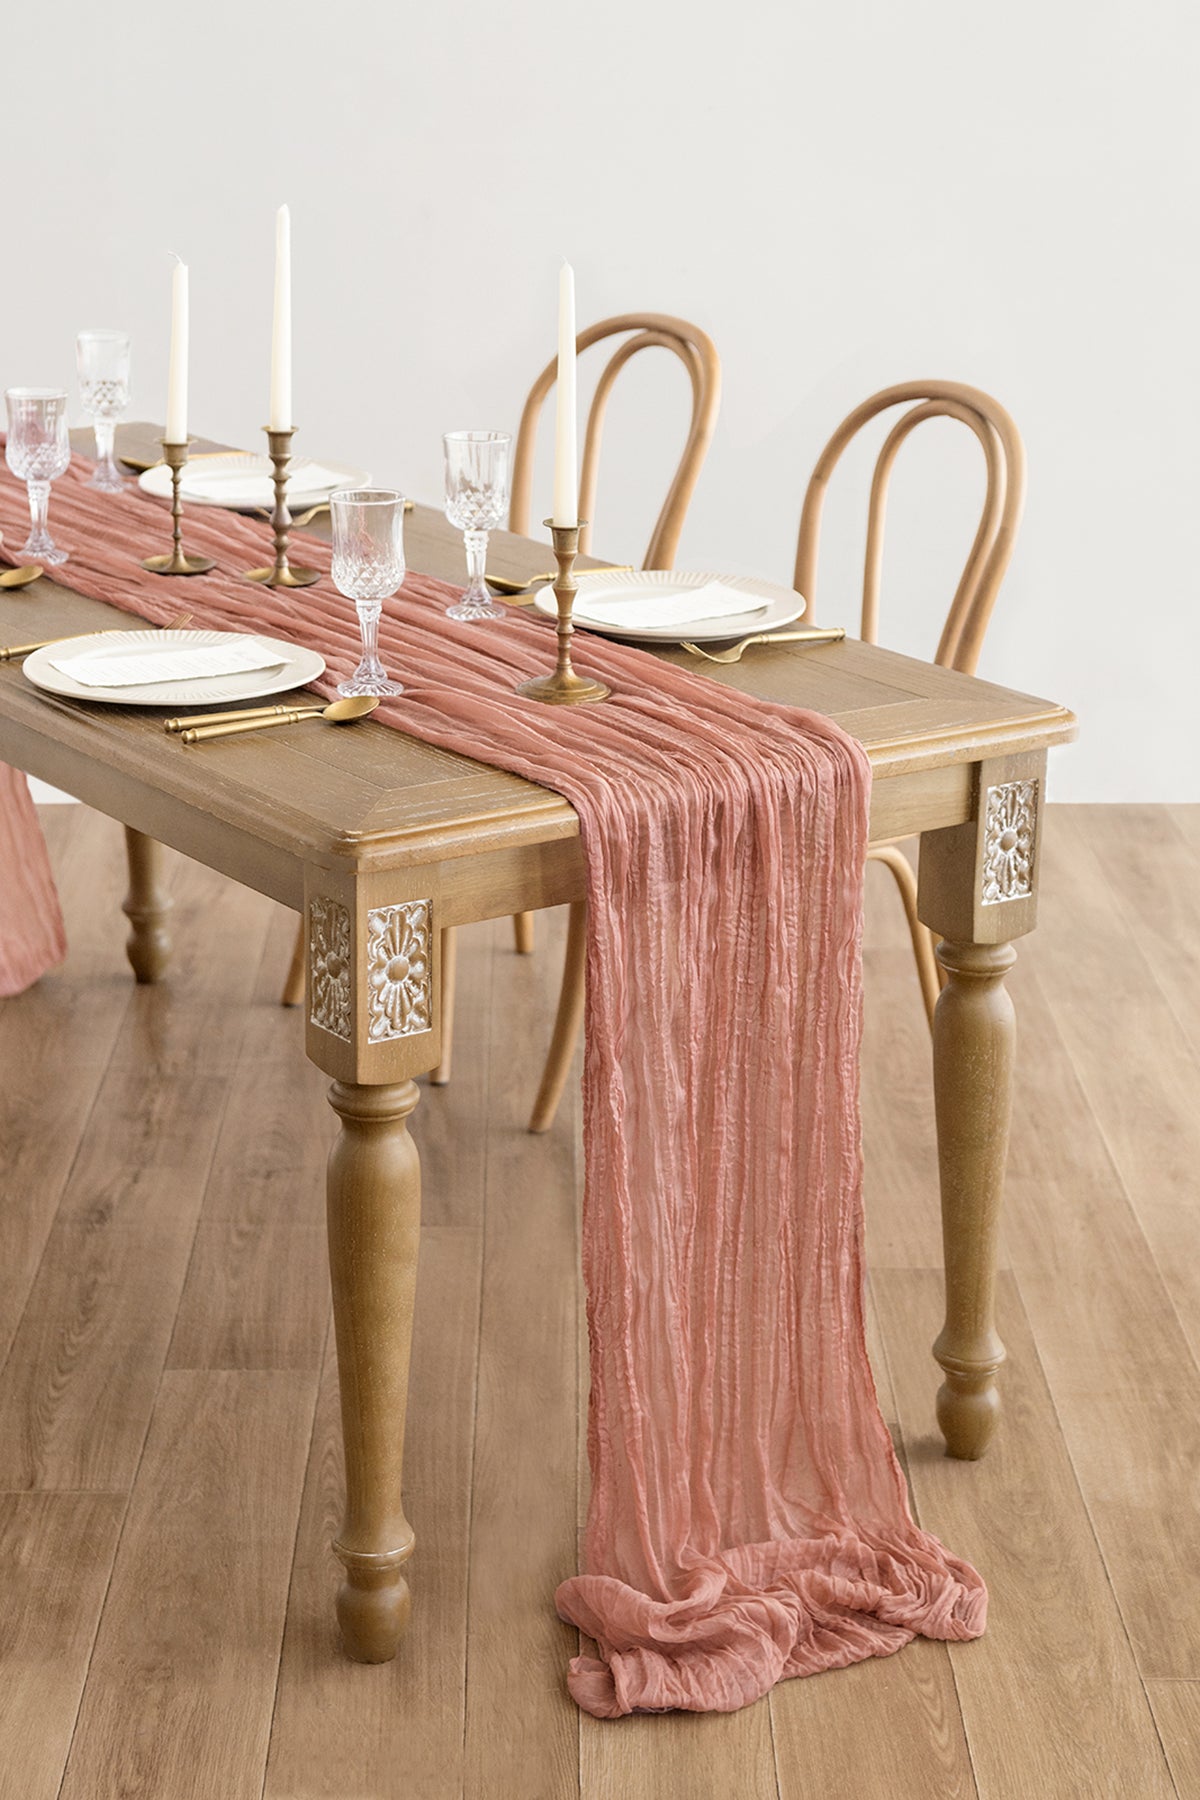 Rustic Gauze Cheesecloth Table Runner 35" w x 10ft/14ft - 17 colors